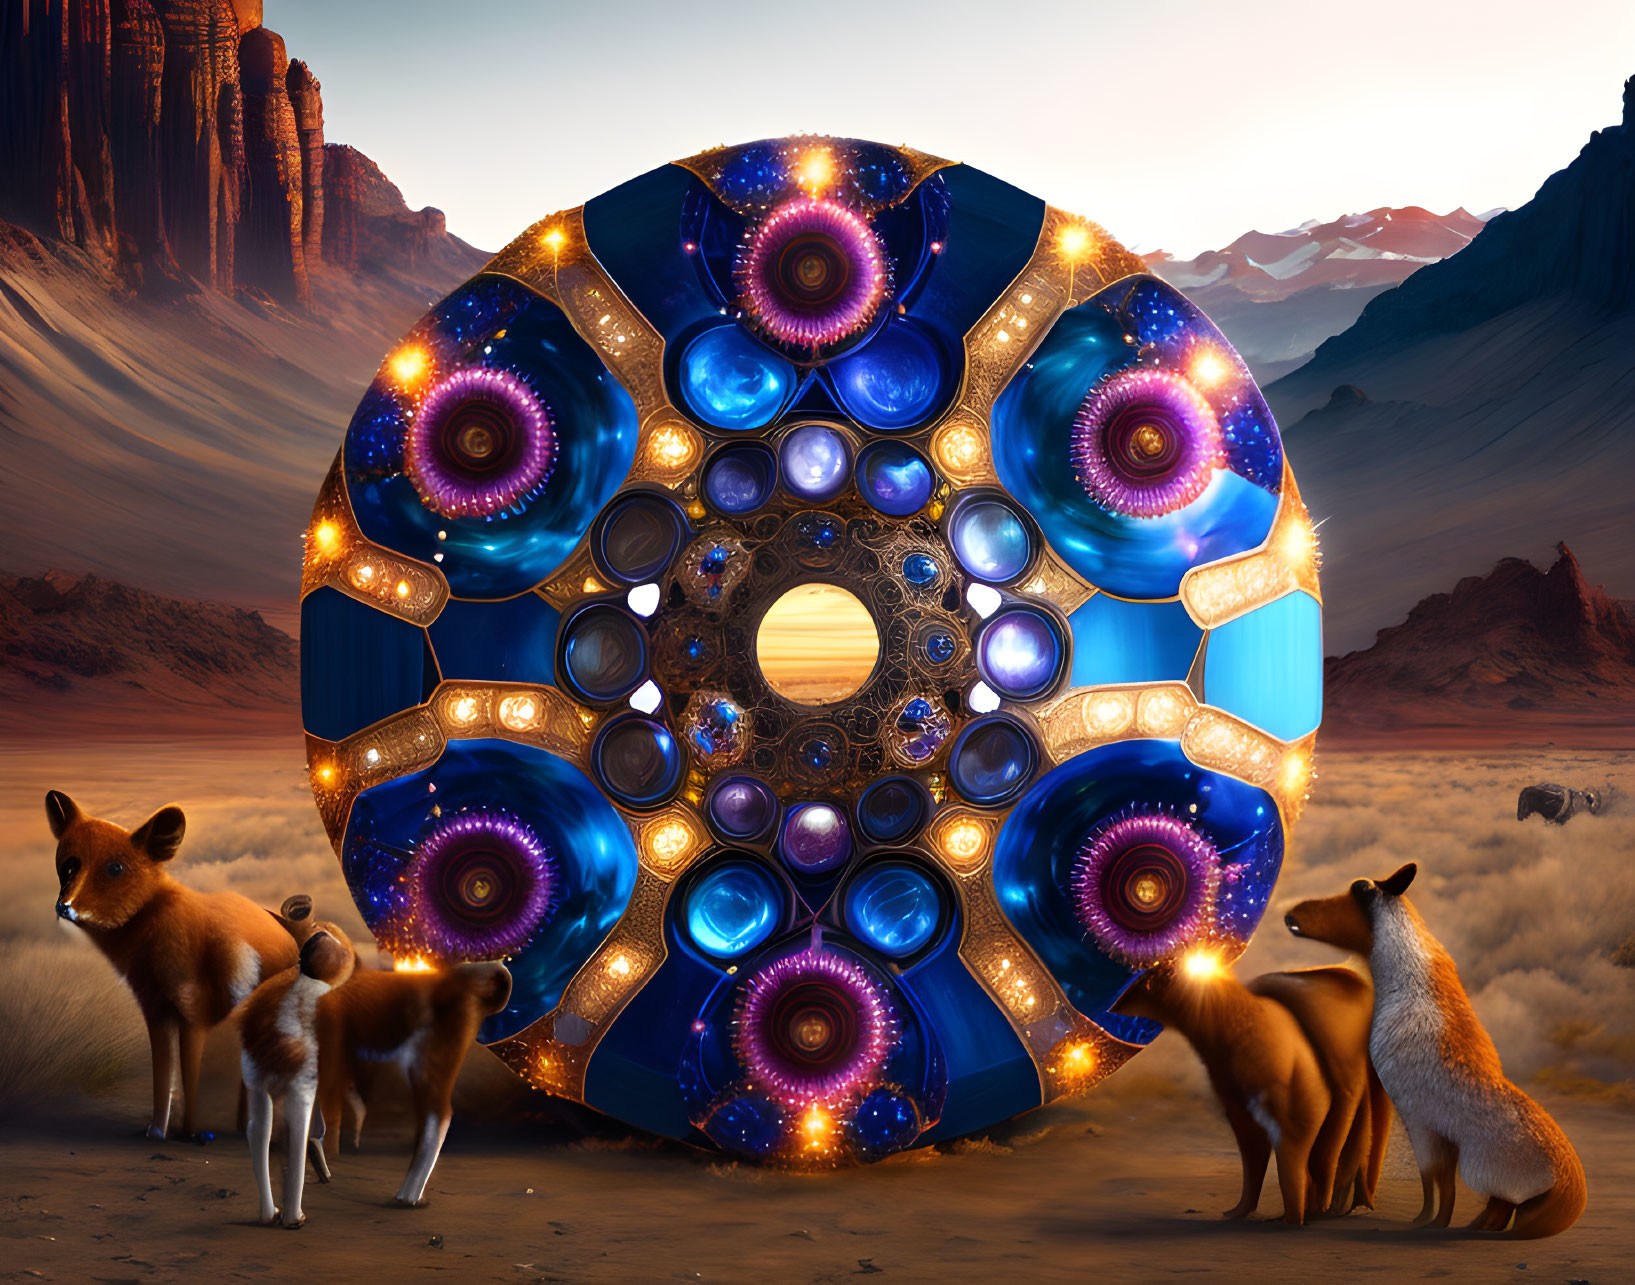 Ornate circular cosmic design with foxes in desert twilight